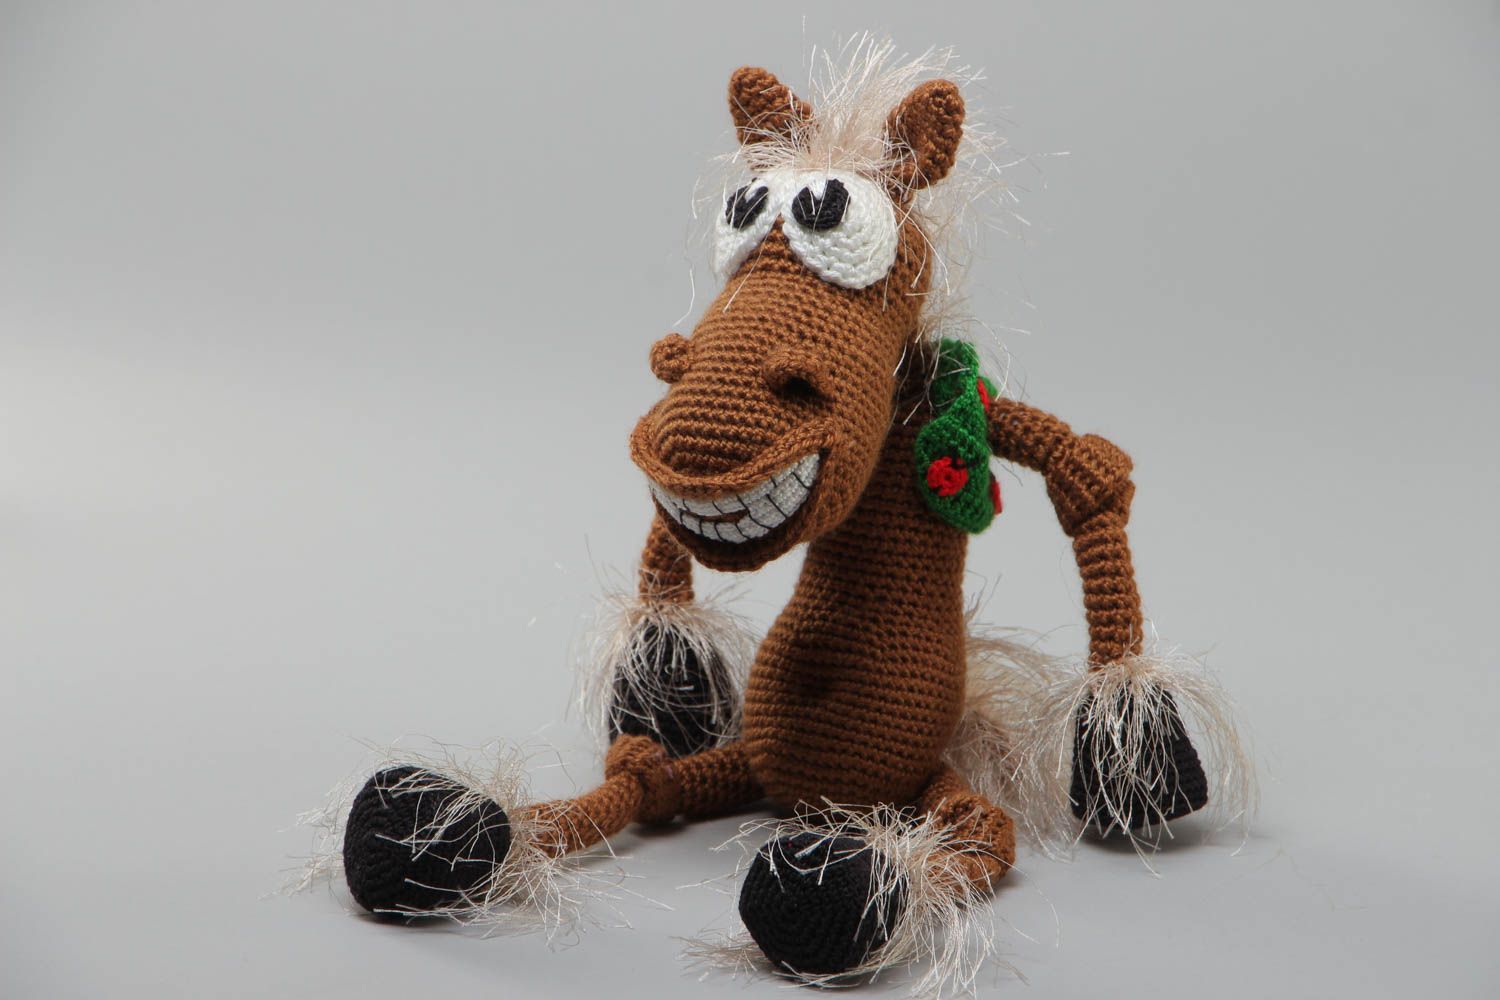 Soft handmade crocheted toy brown horse made of acrylic yarns funny doll photo 2